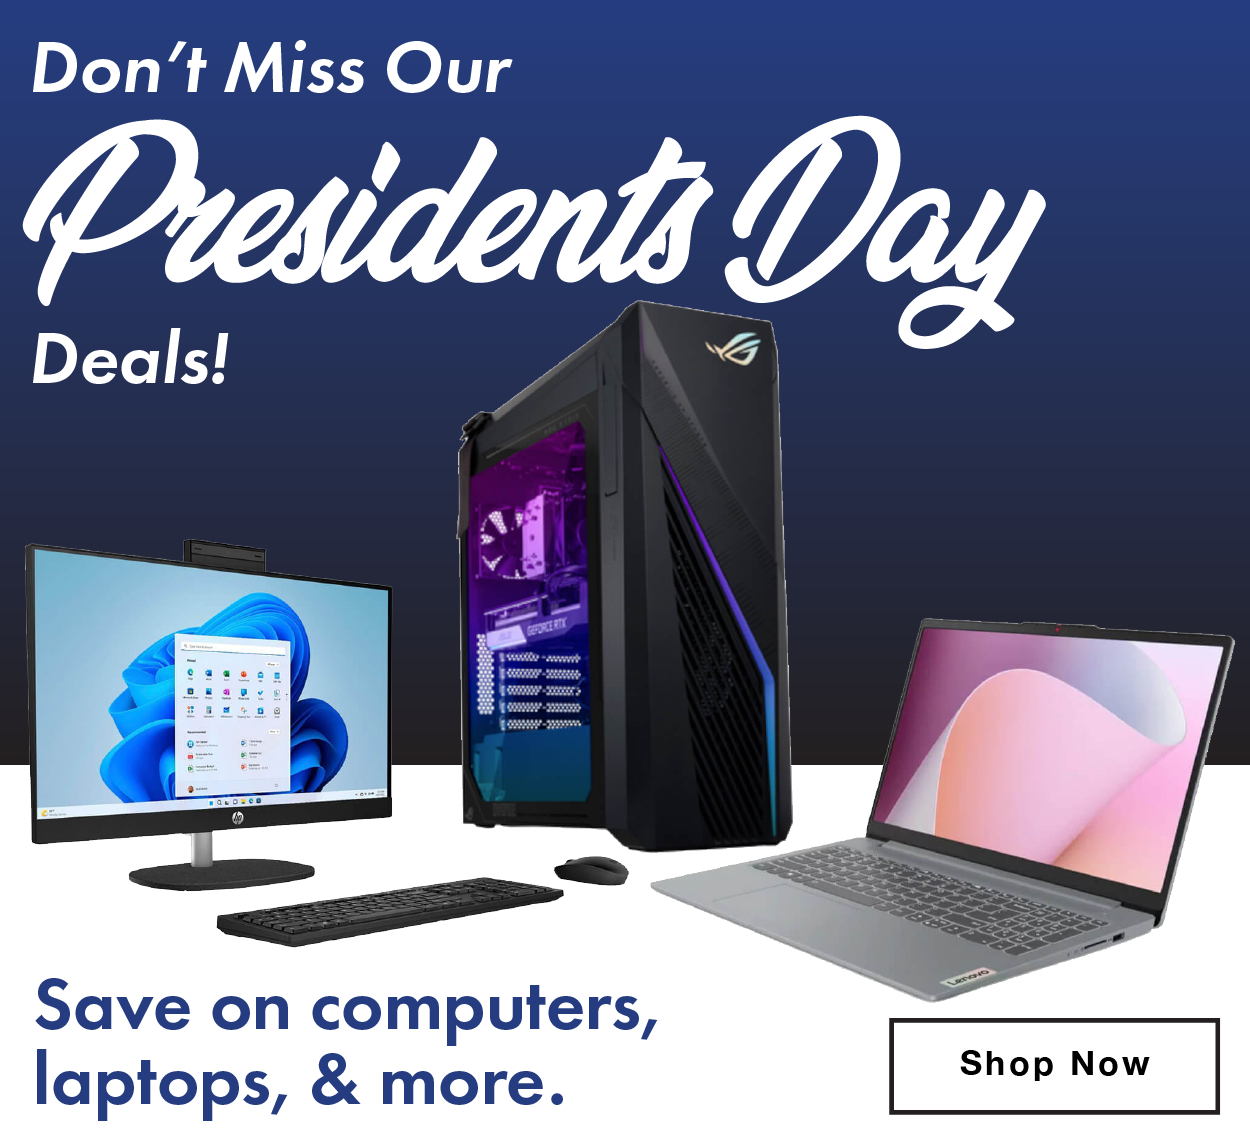 Don't miss our President's Day Deals!